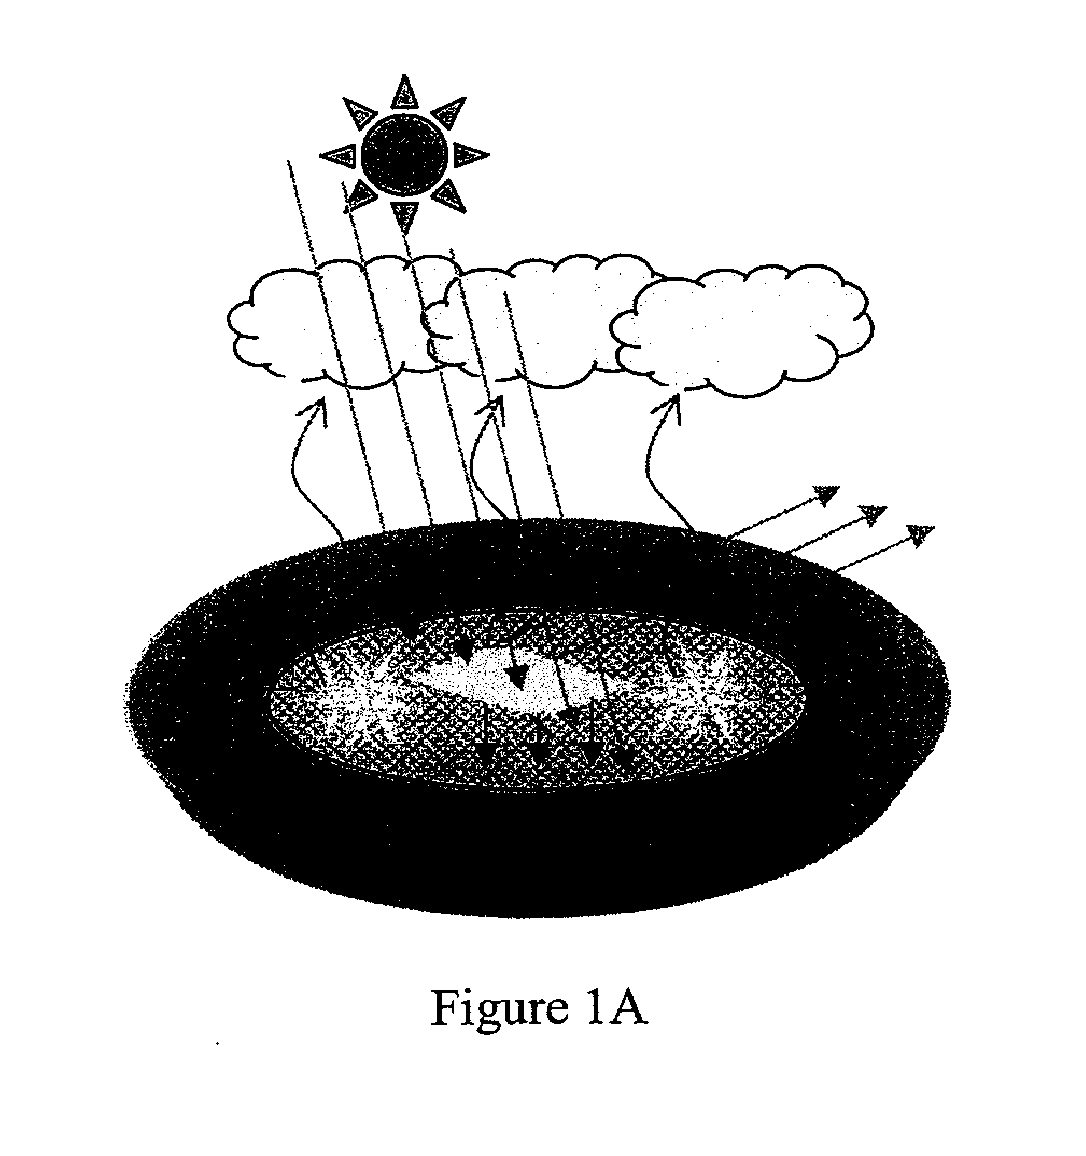 Methods for environmental modification with climate control materials and coverings